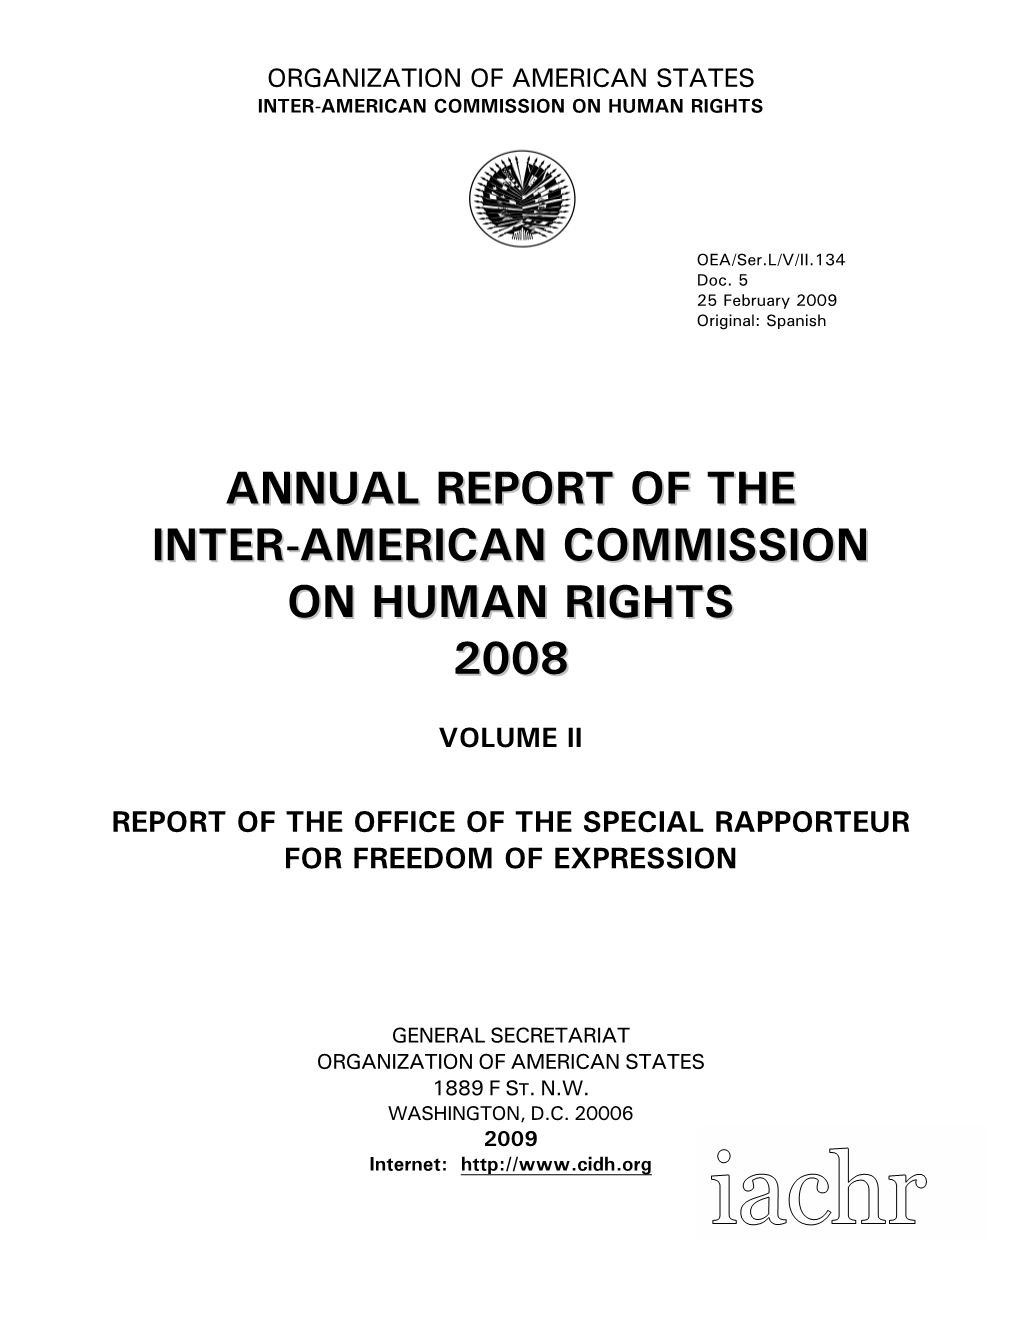 Annual Report of the Office of the Special Rapporteur for Freedom of Expression 2008